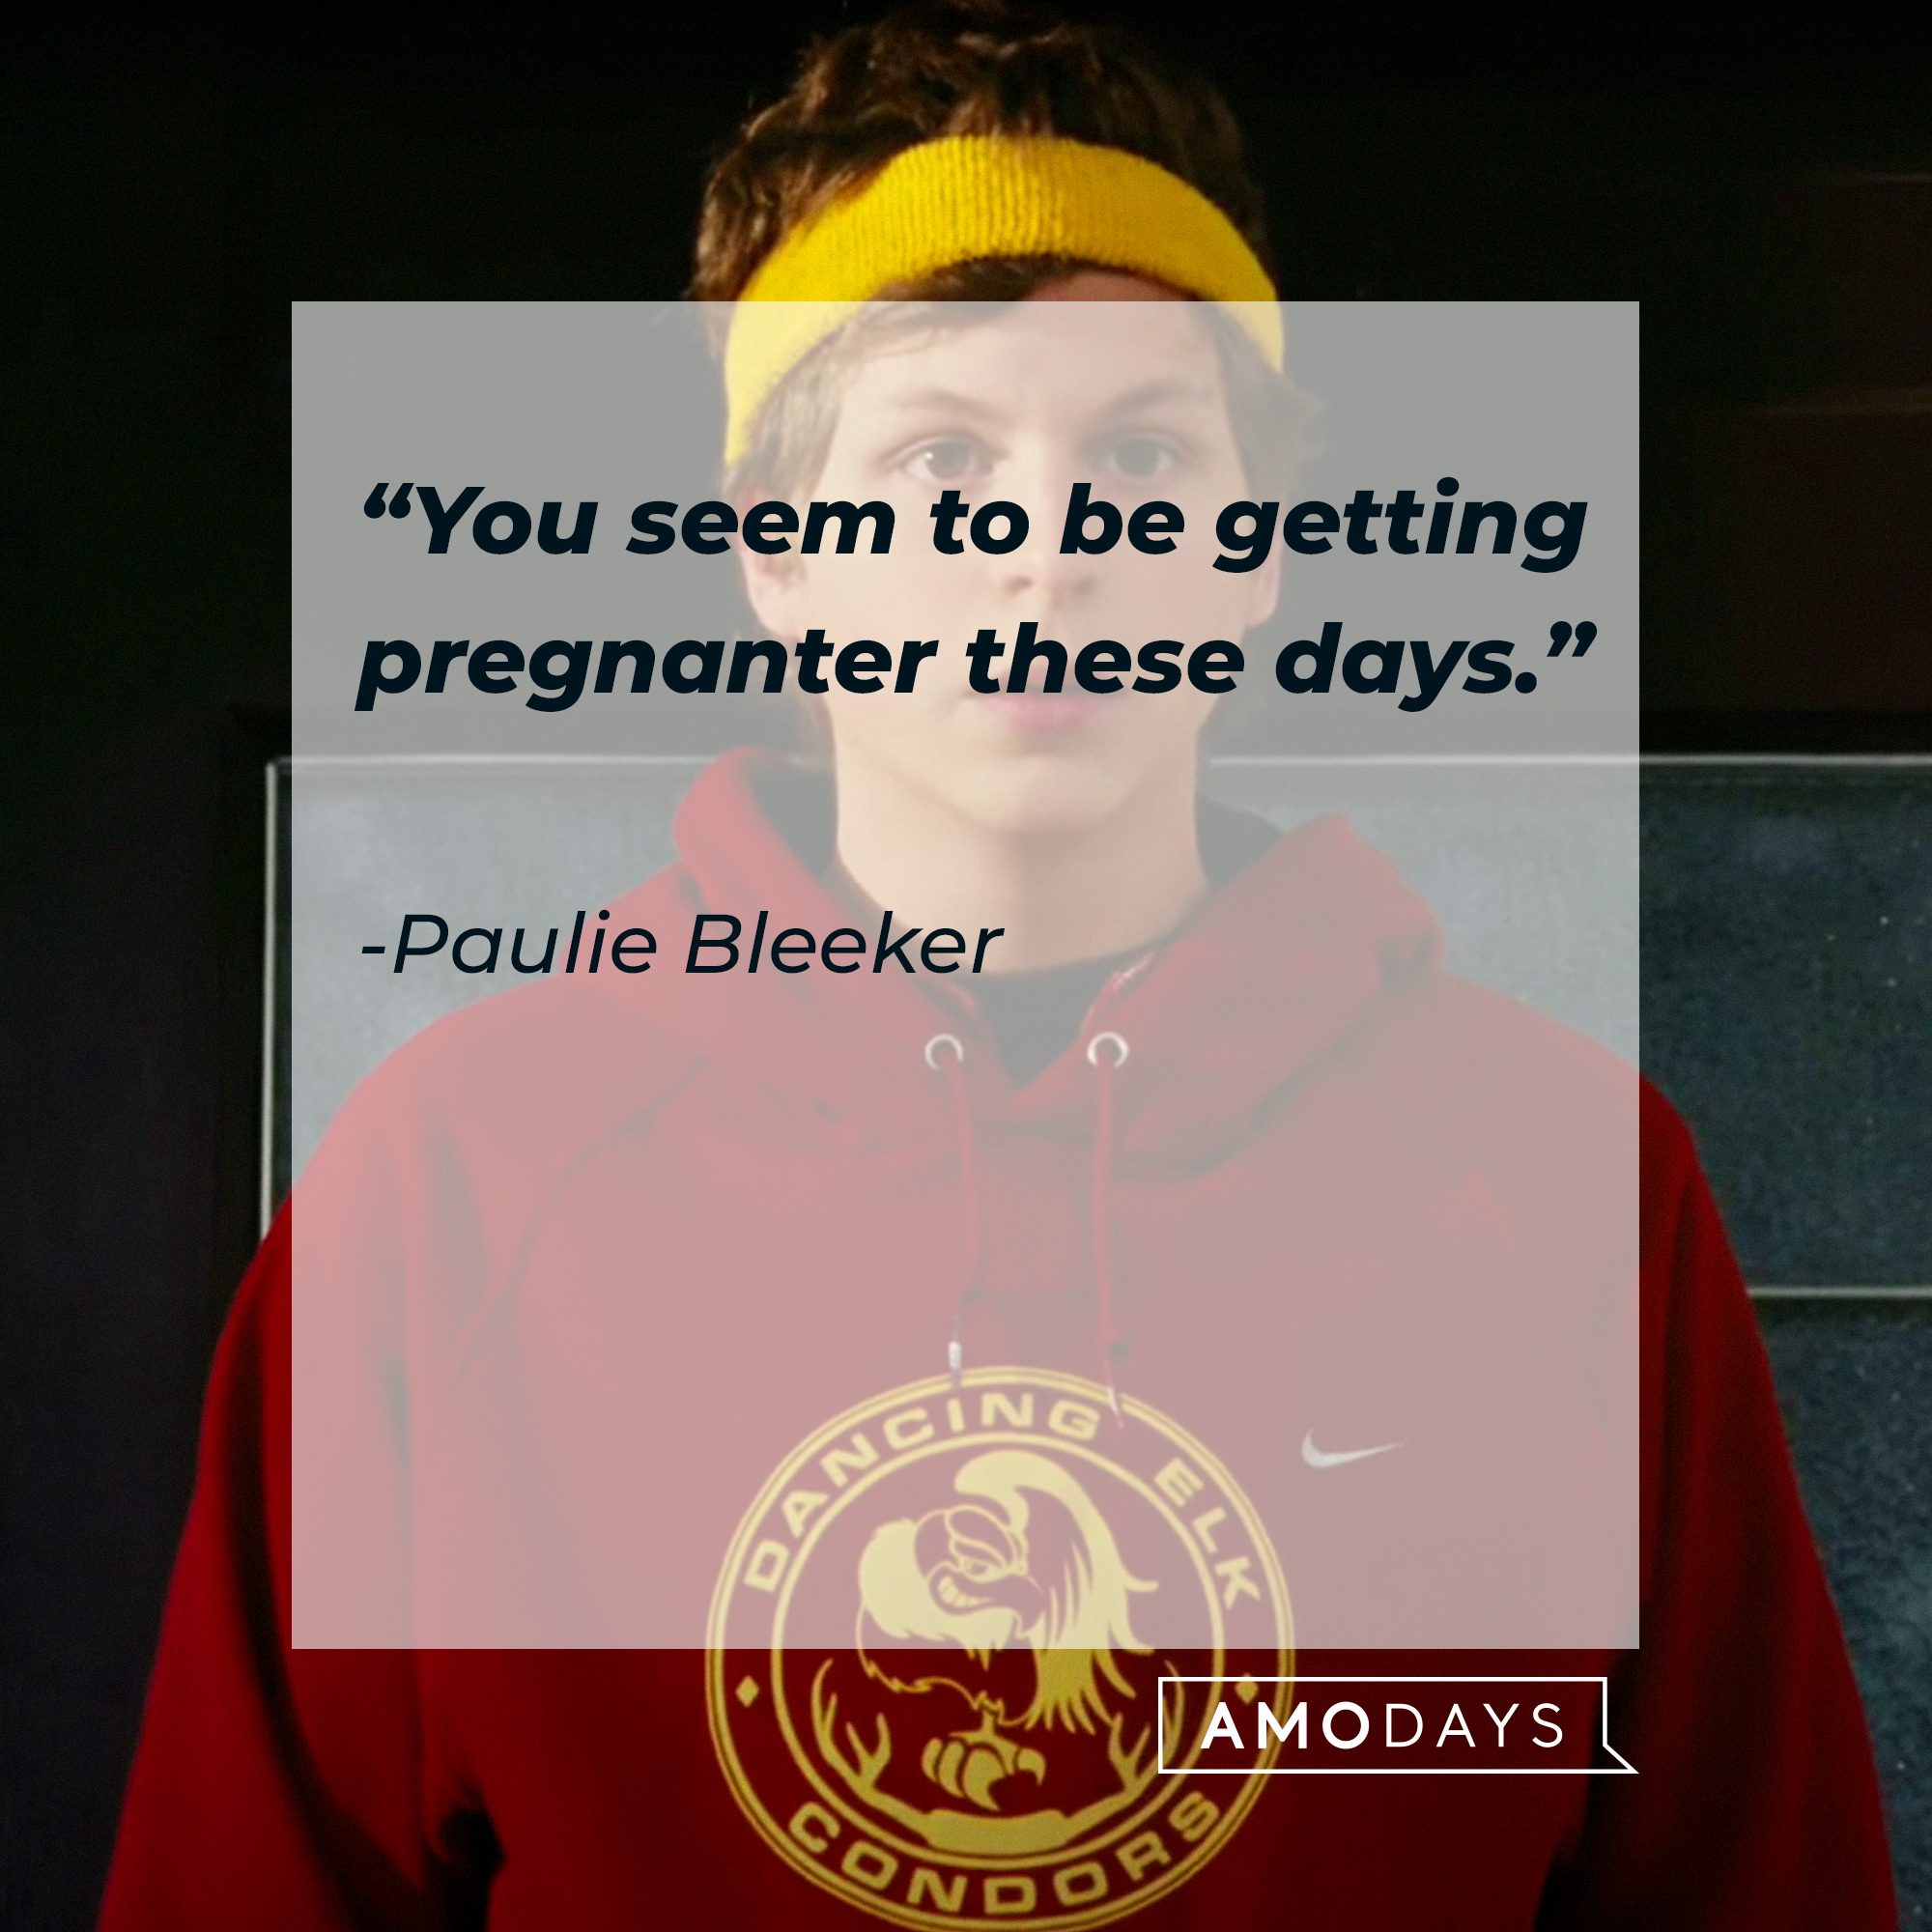 Paulie Bleeker, with his quote: “You seem to be getting pregnanter these days.” | Source: Facebook.com/JunoTheMovie